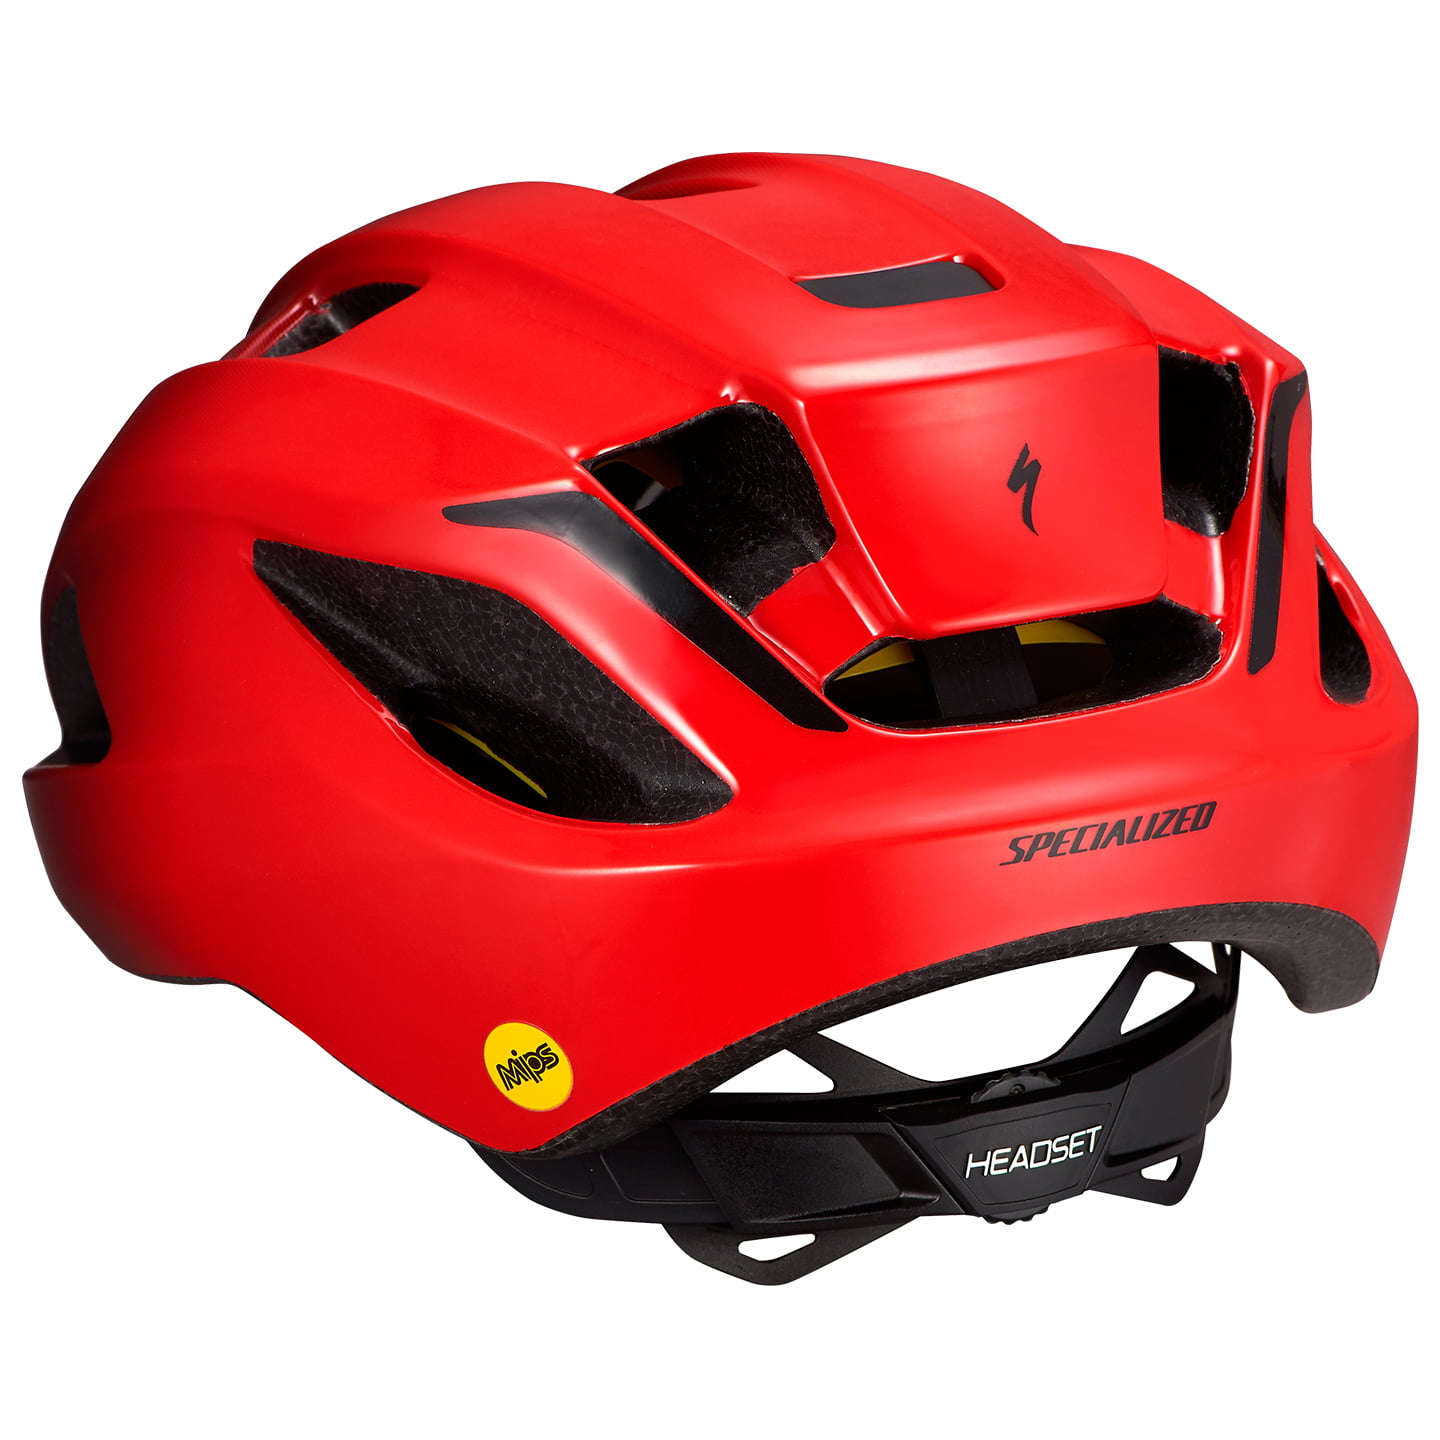 Red Specialized MIPS helmet. Glide layer and yellow logo.